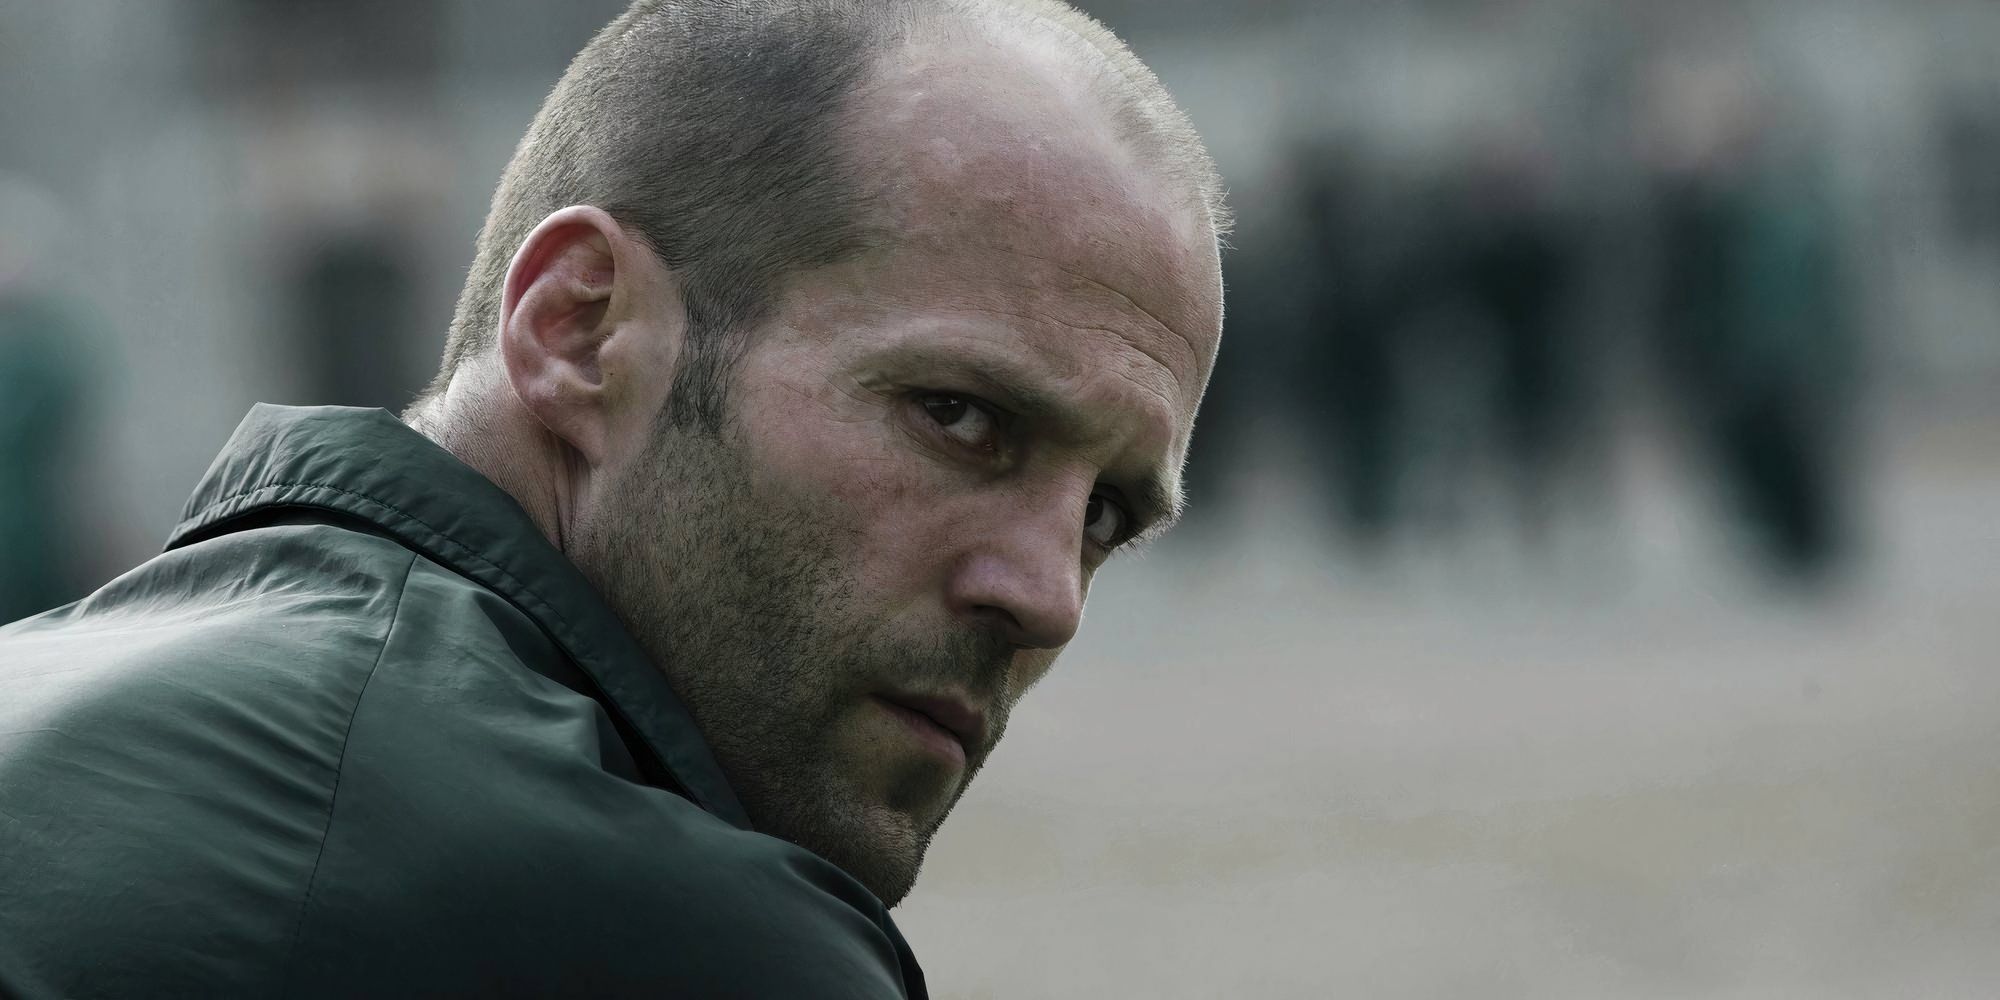 Jason Statham as Jensen Ames in Death Race looking over his shoulder.